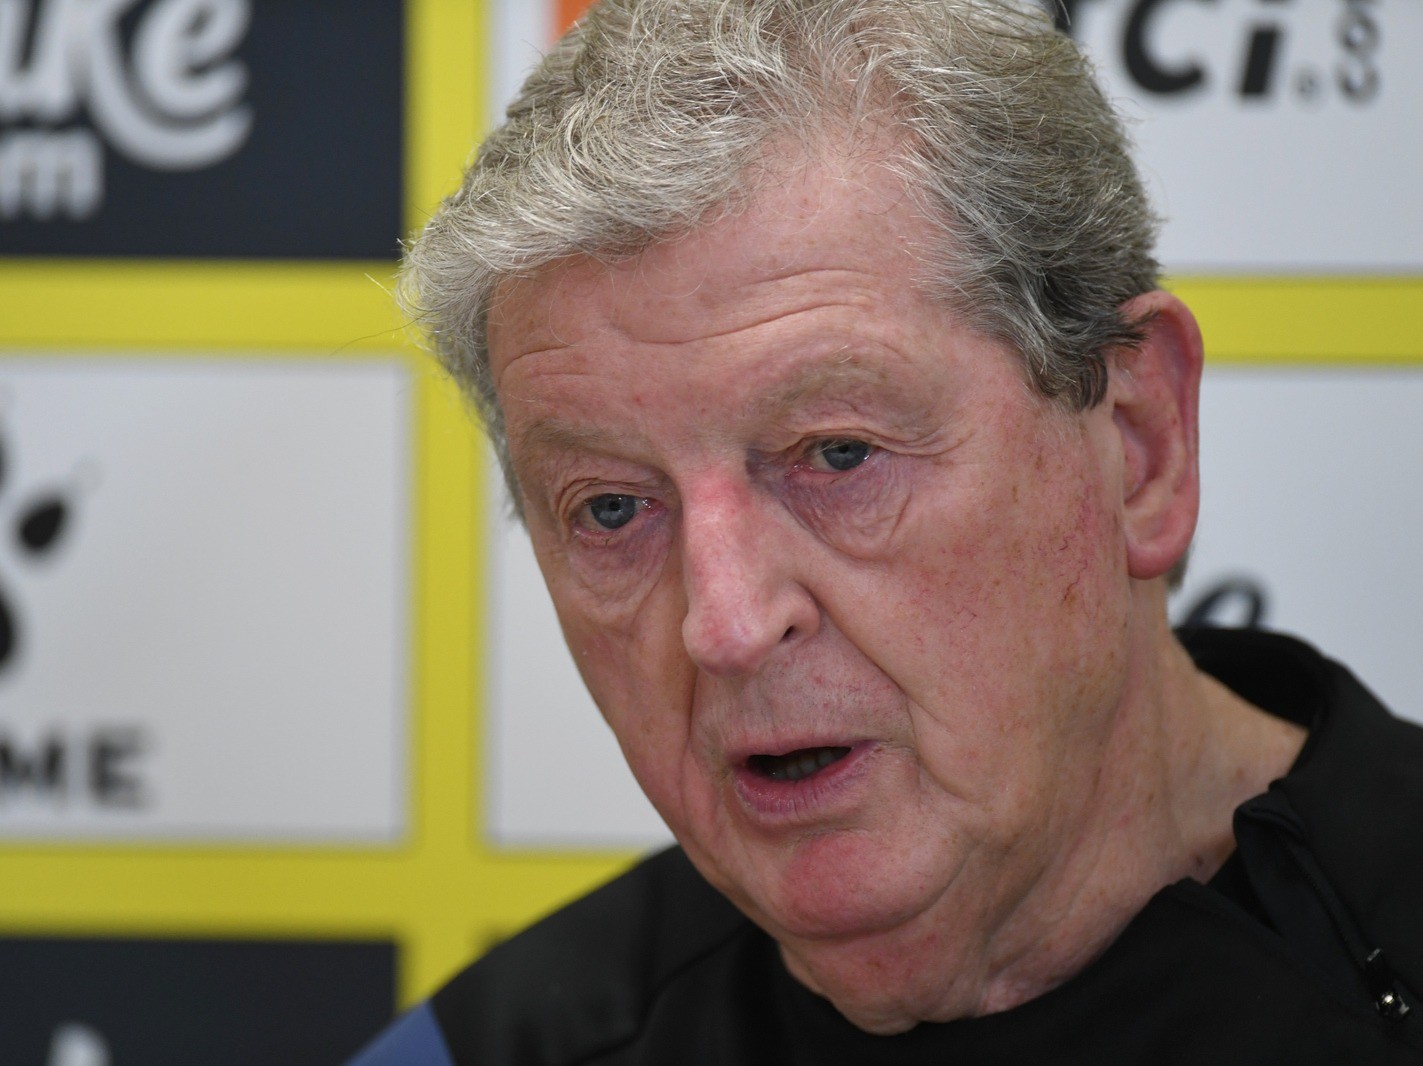 Hodgson: “We Have To Be Prepared” - Watford FC